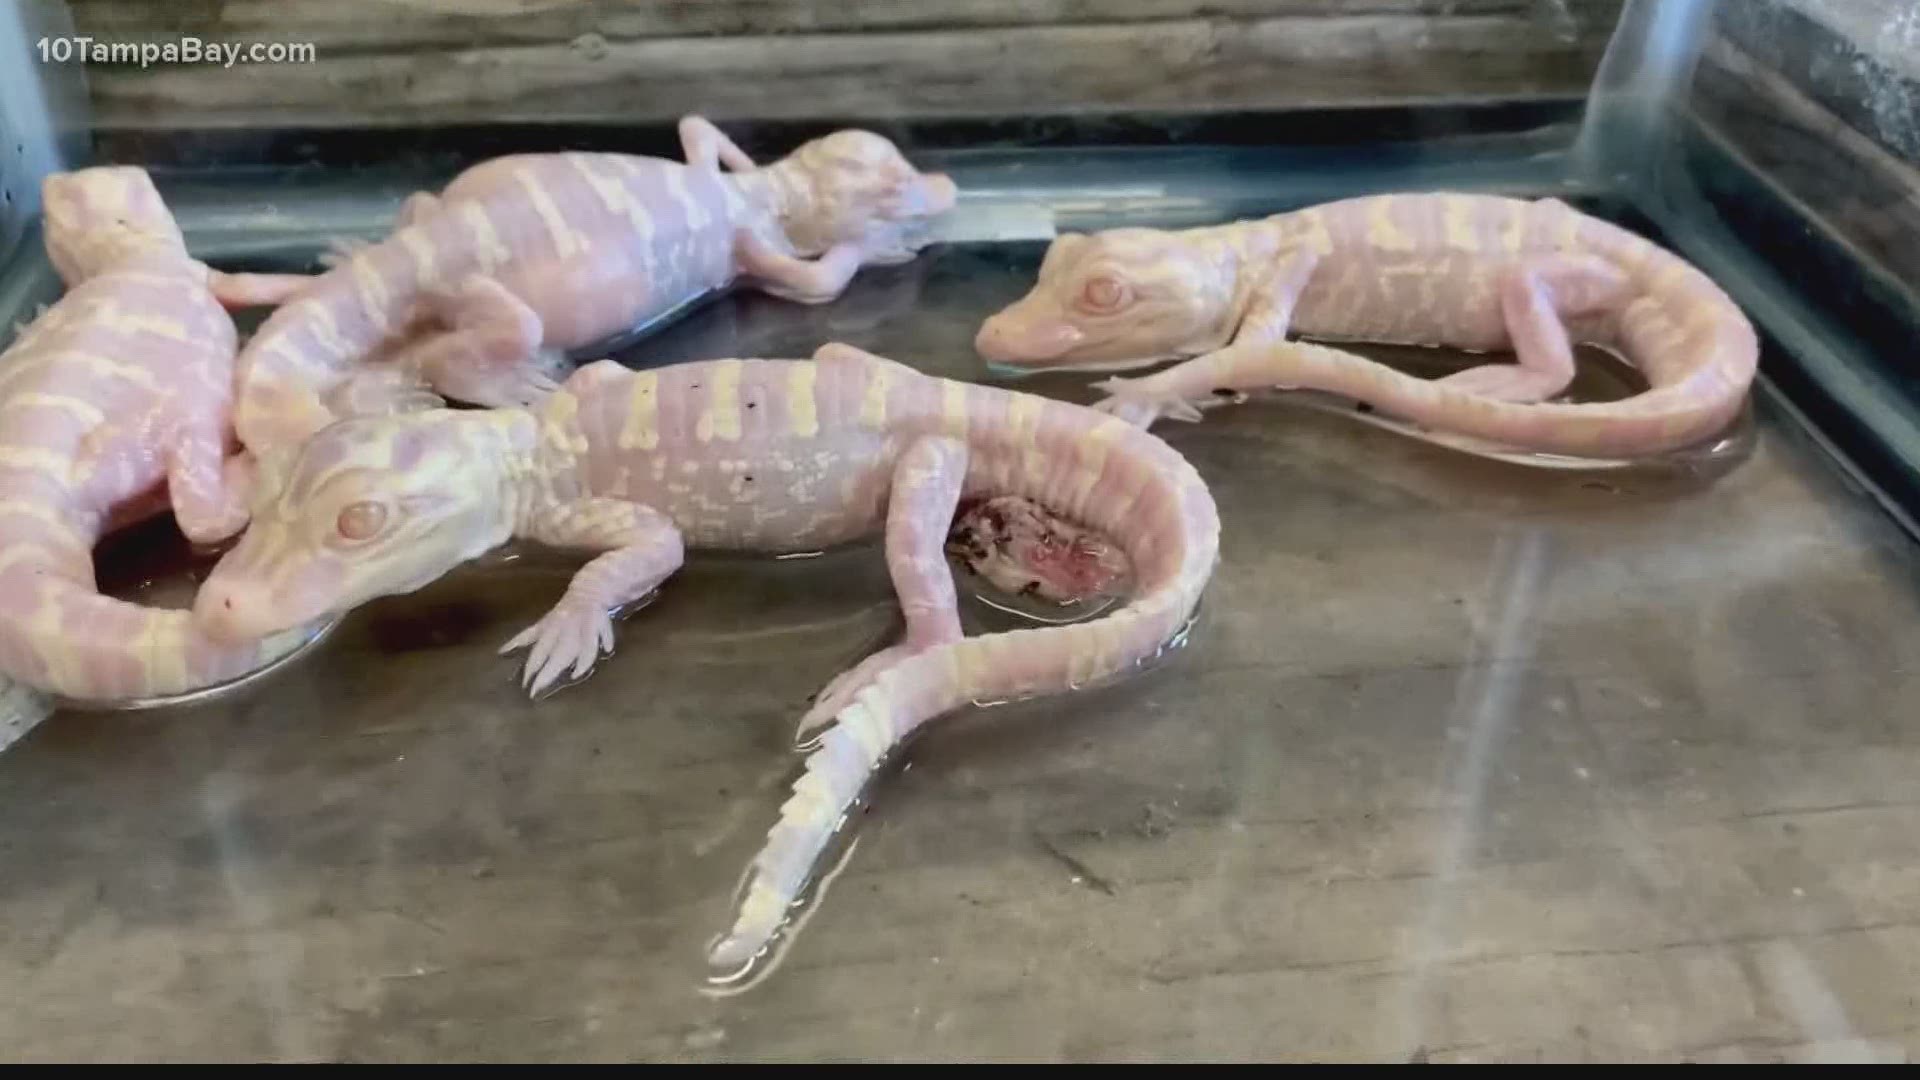 Wild Florida is the first attraction in the world to successfully hatch albino alligator babies.